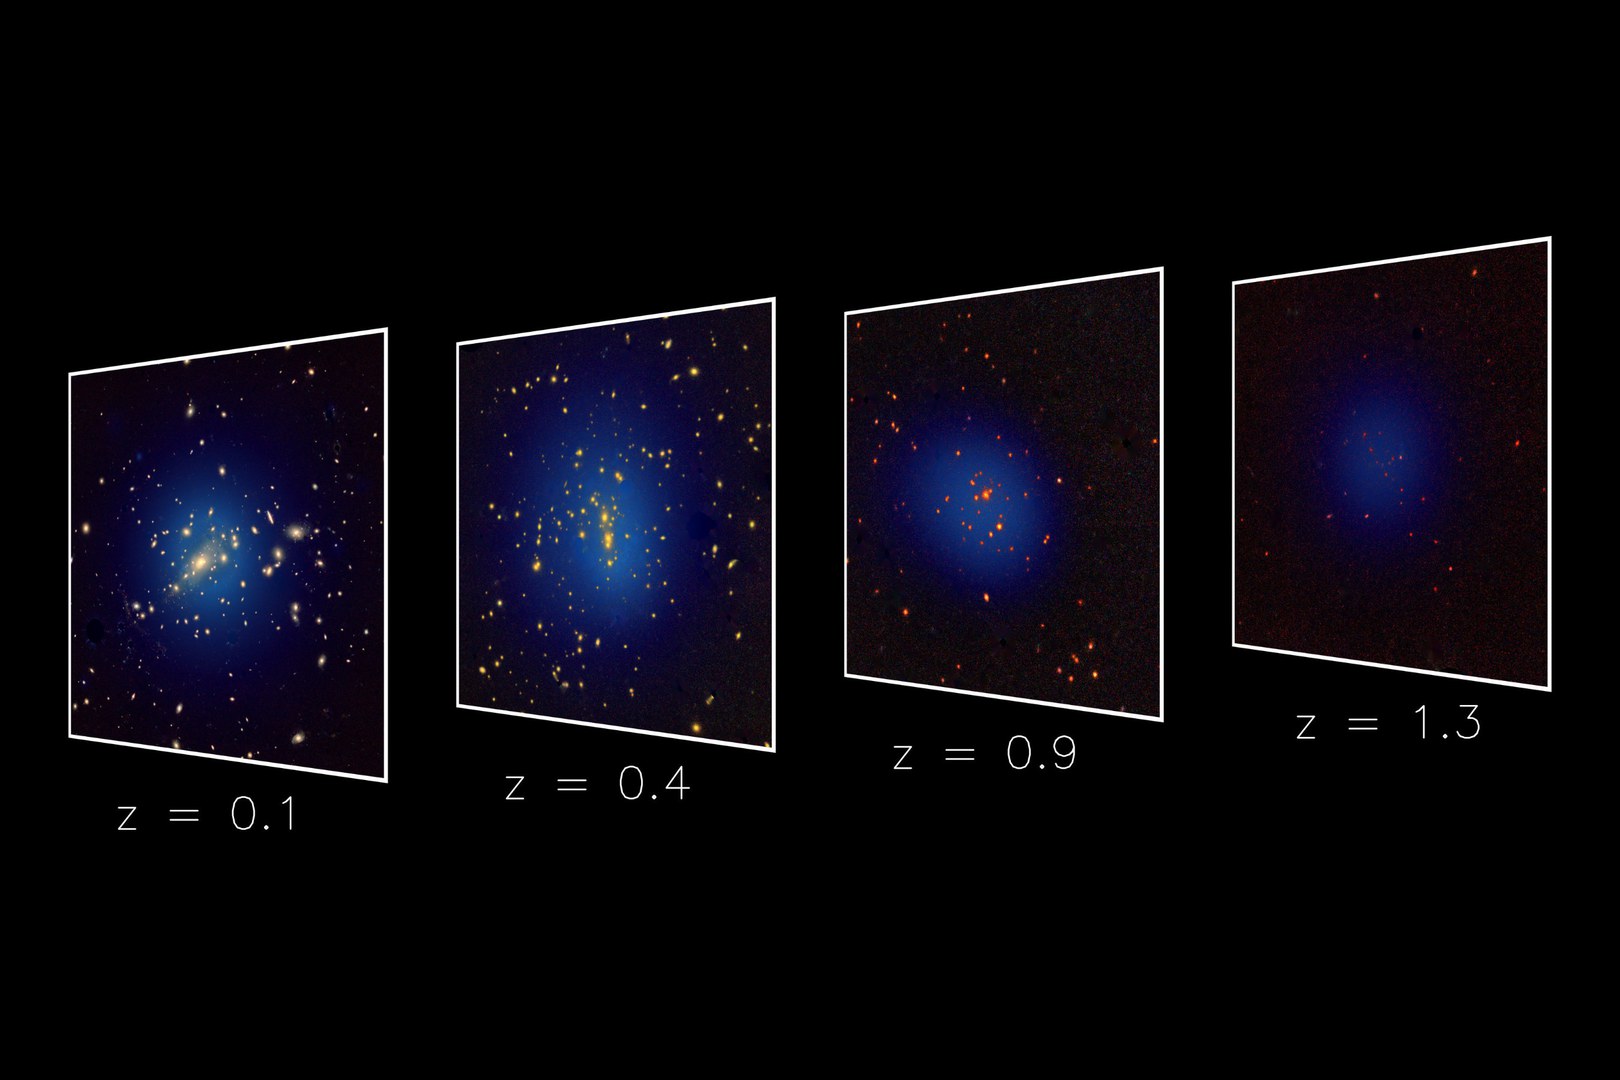 Same as above but showing only the galaxies that are expected to be in the respective clusters (and not in the fore- or background).